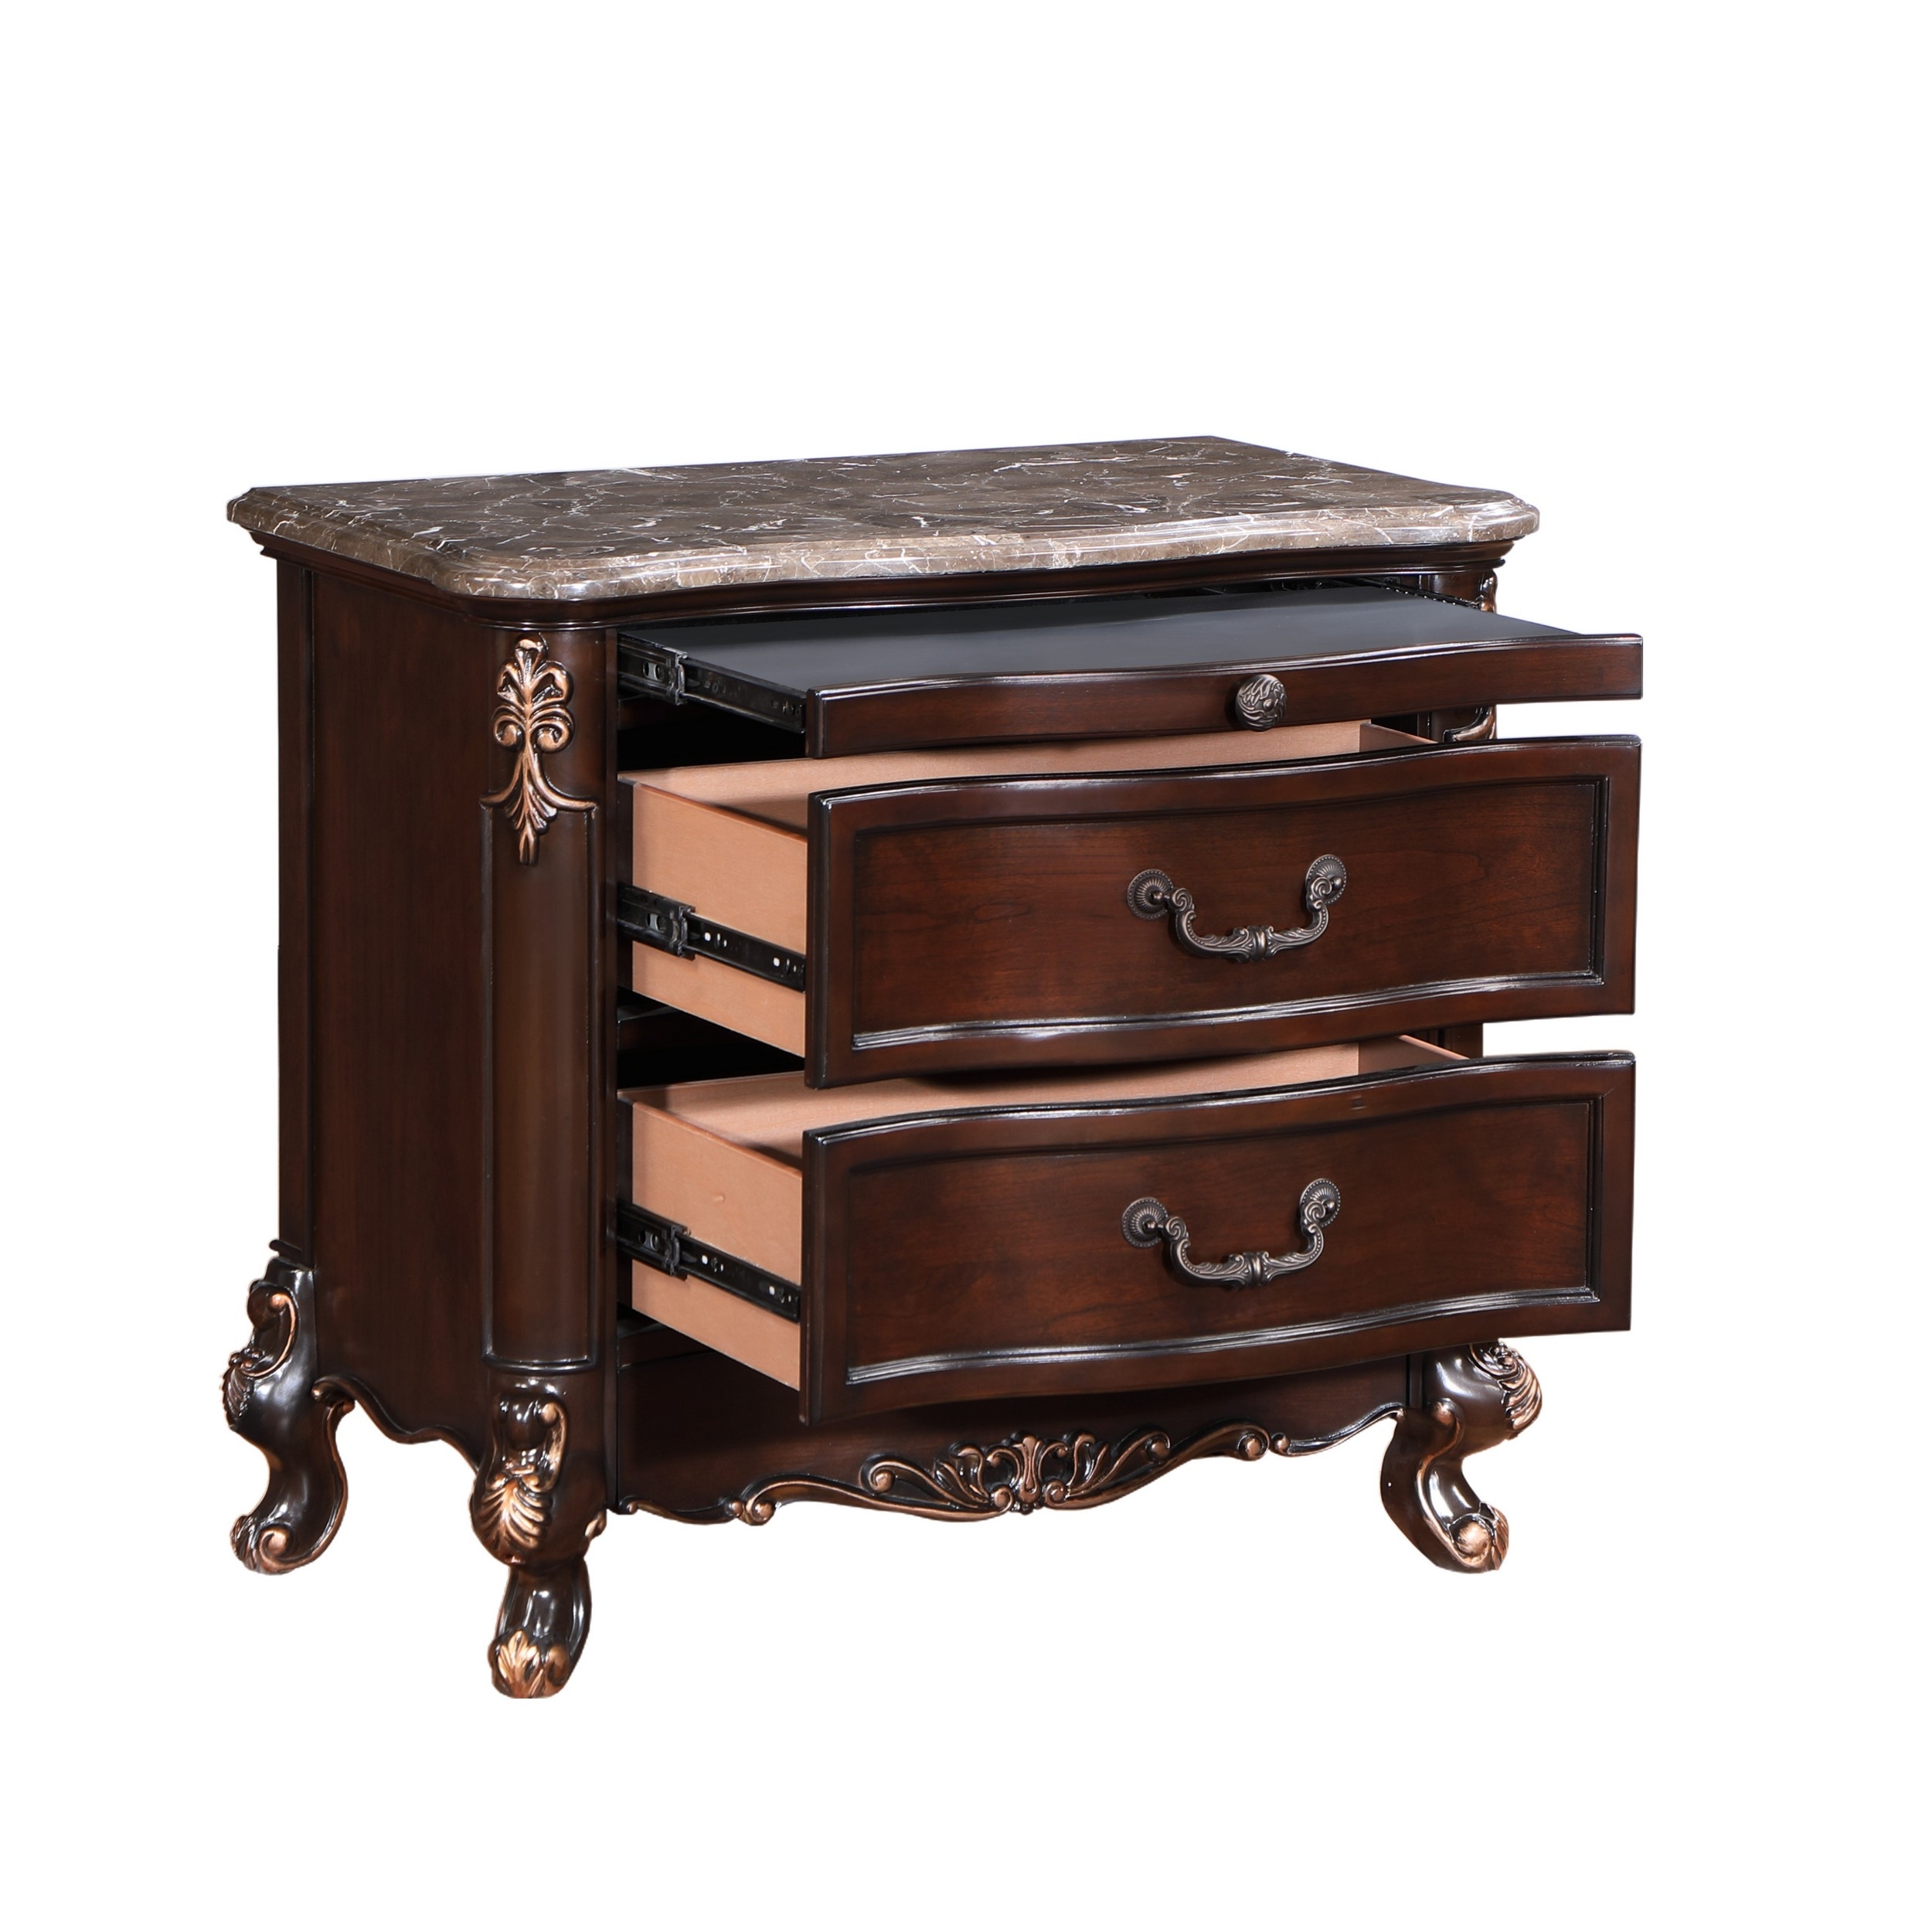 Leon 32 Inch 2 Drawer Nightstand, Carved Details, Marble Surface, Brown - Saltoro Sherpi